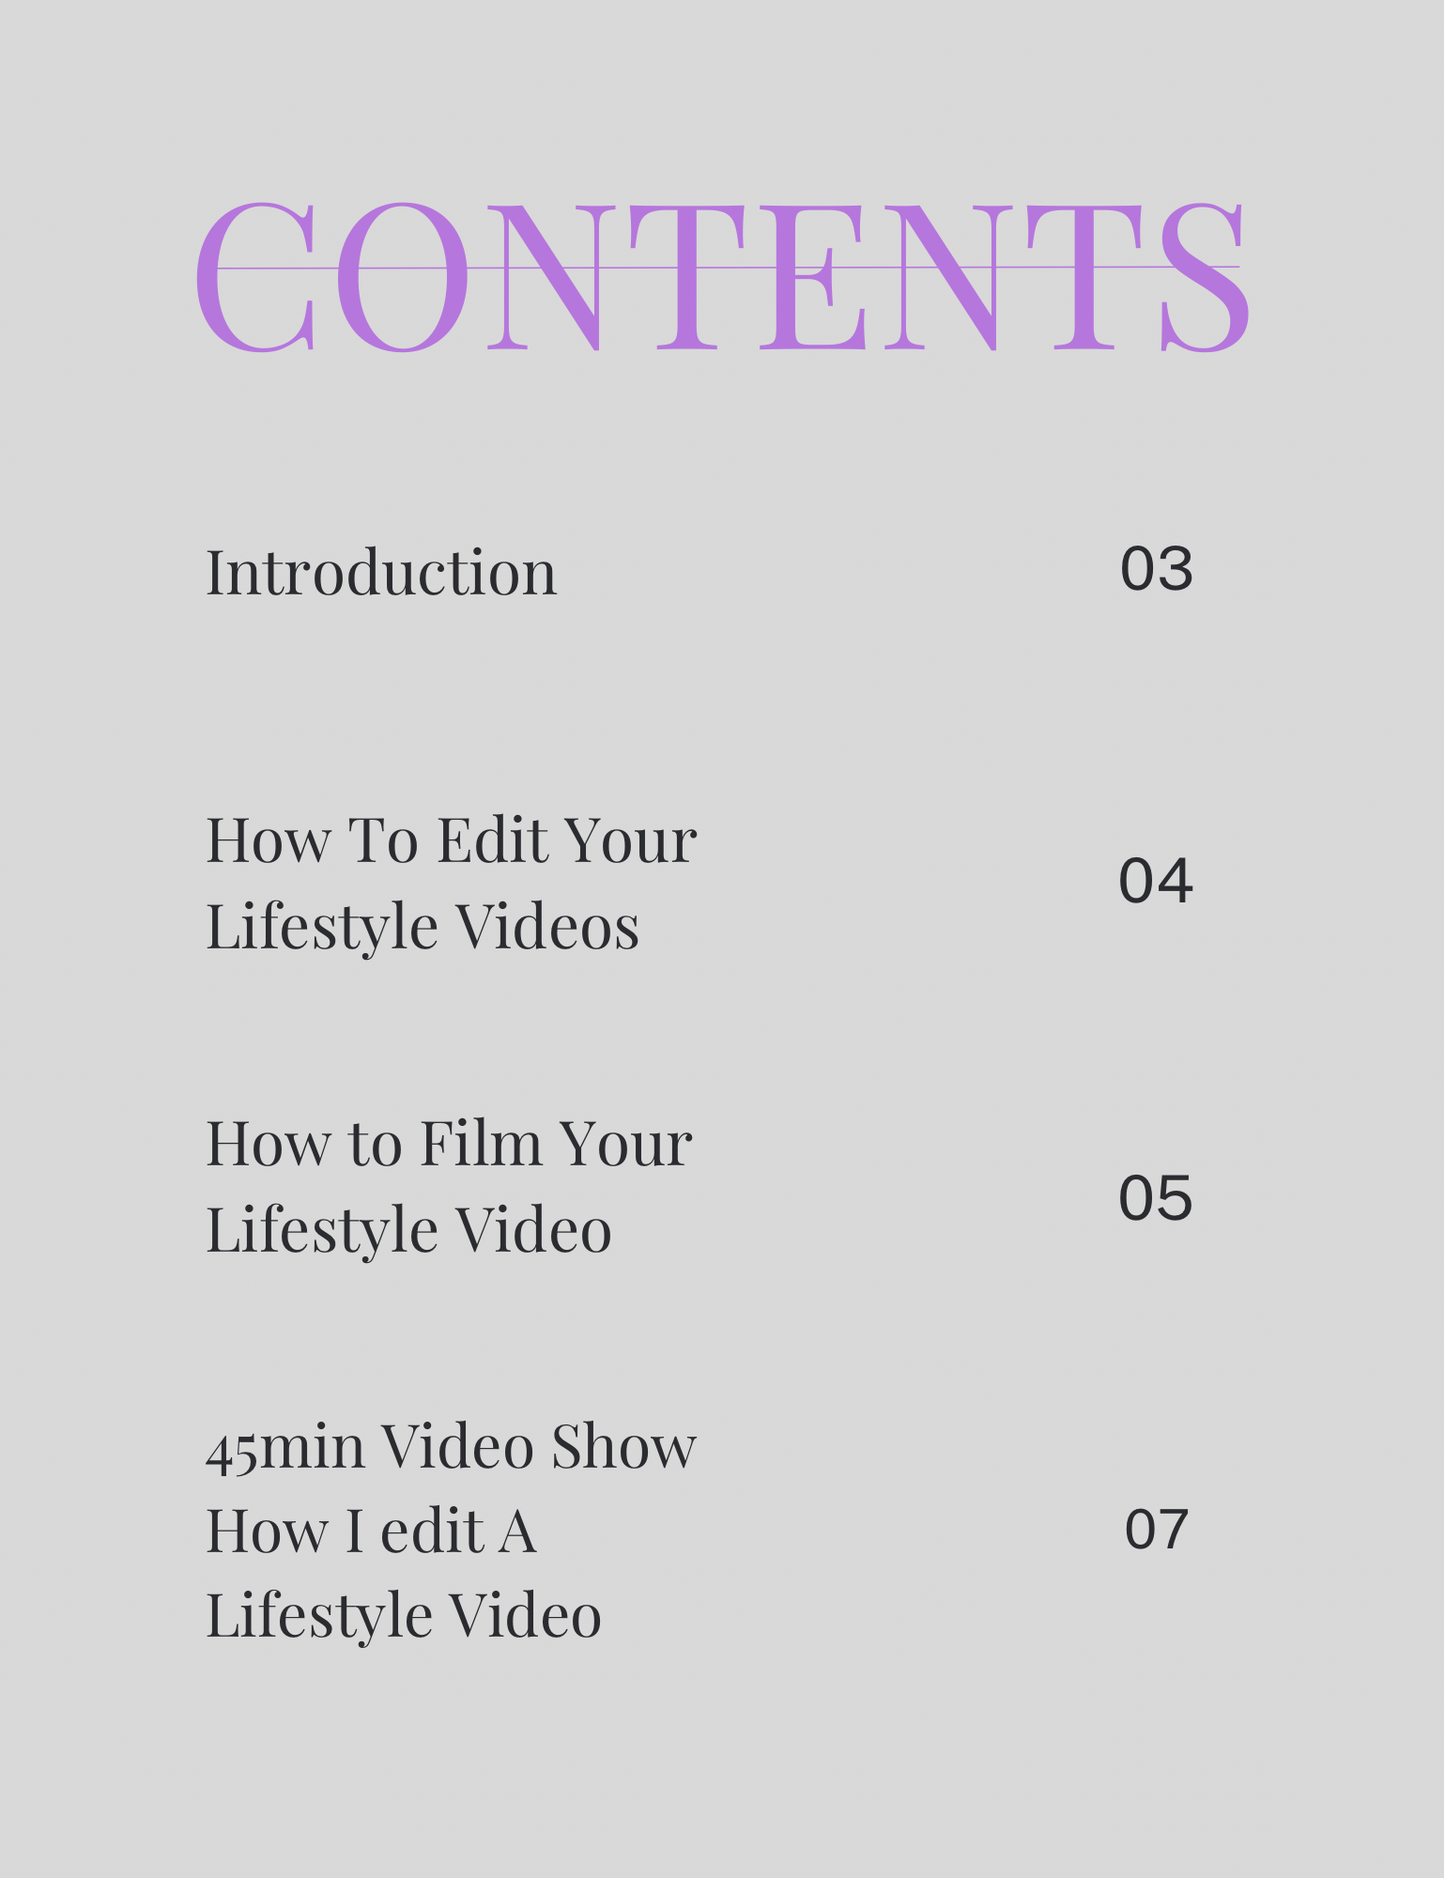 How To Edit Lifestyle Content Course